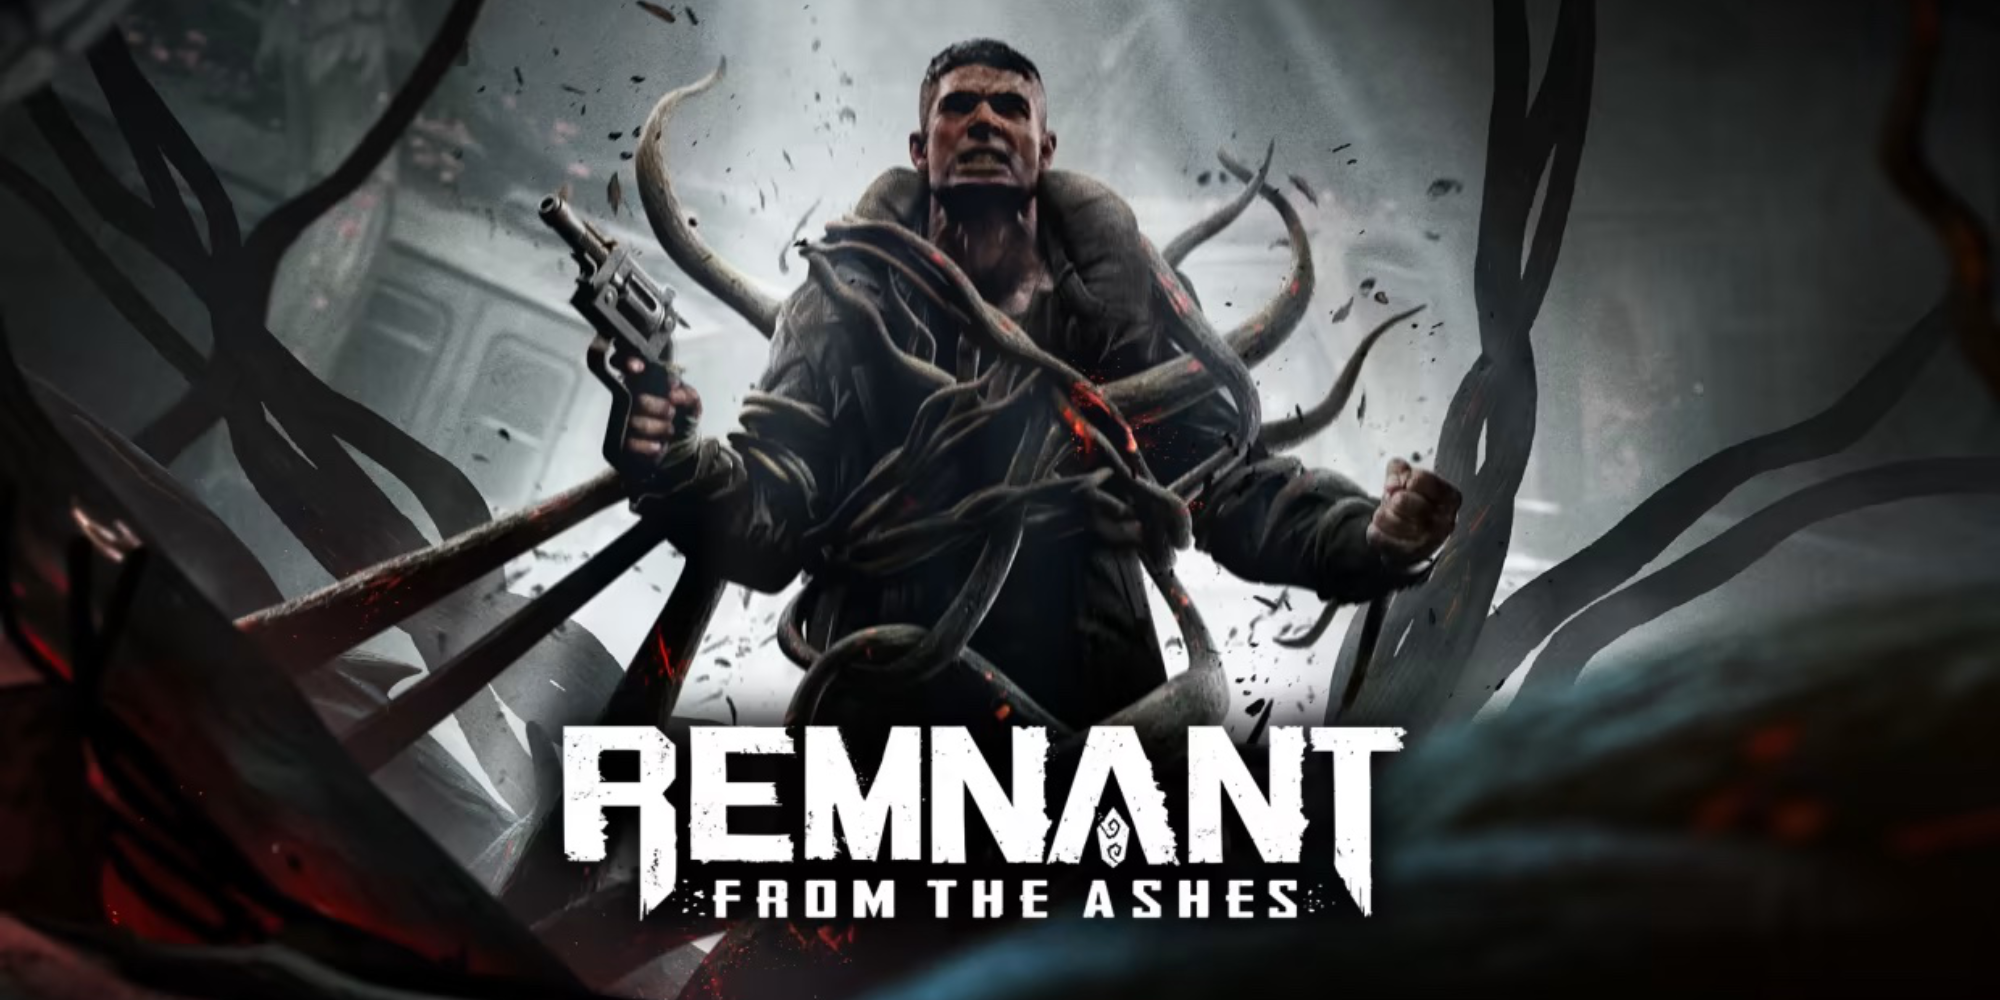 Remnant From the Ashes Switch Review remnant keyart and logo